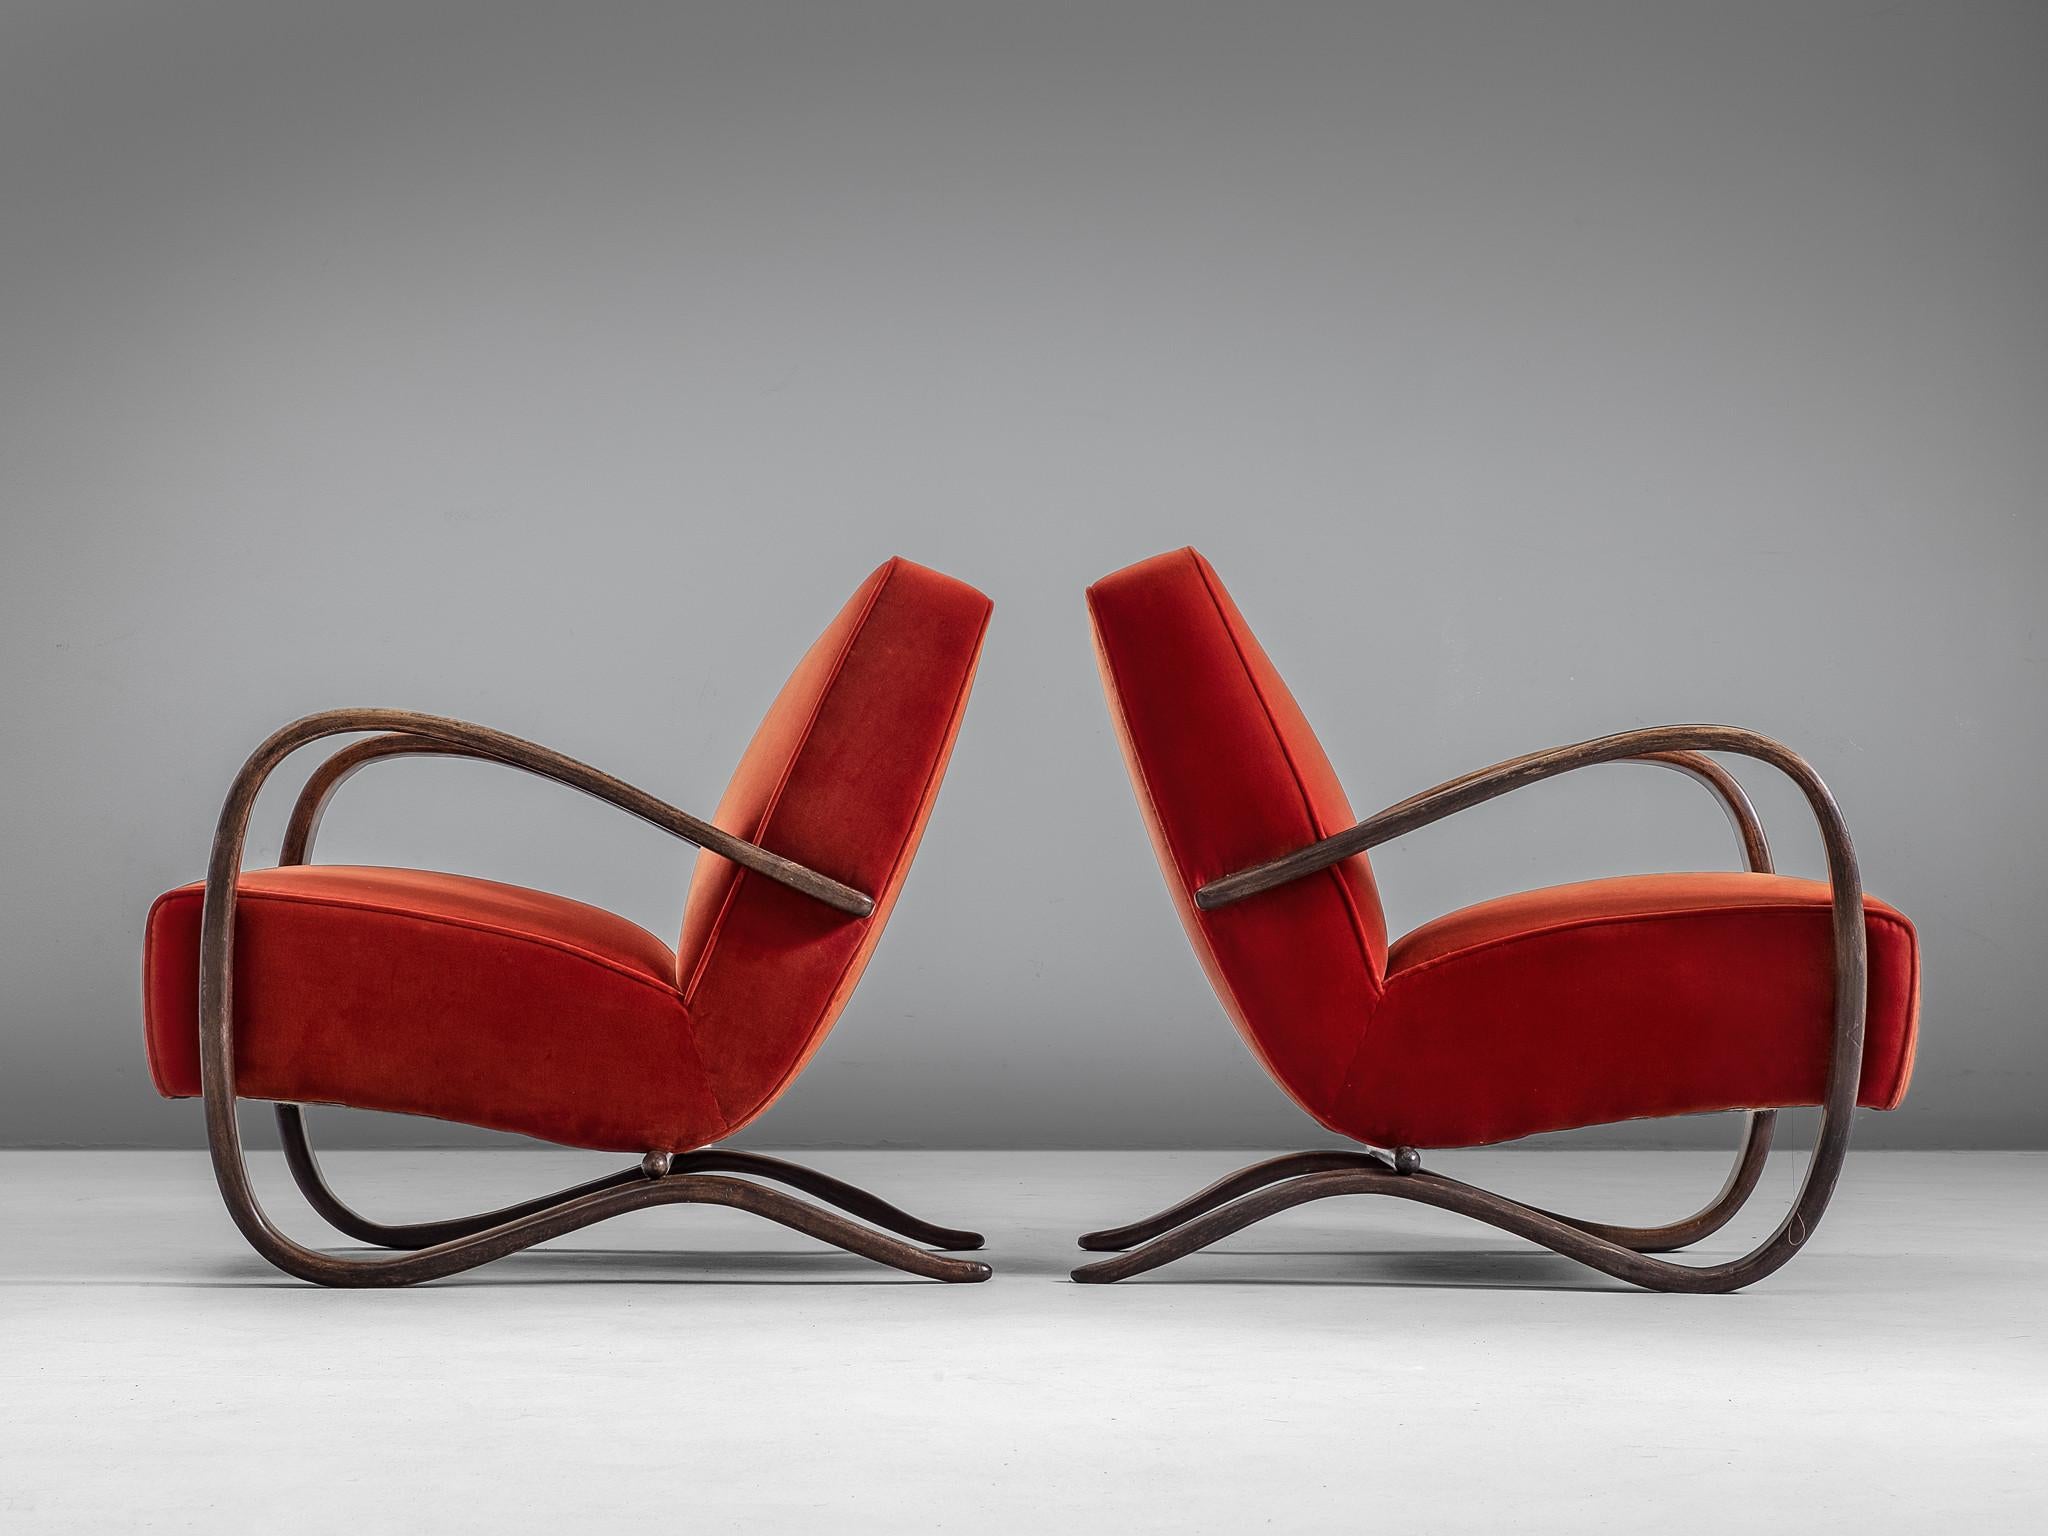 Czech Jindrich Halabala Lounge Chairs in Red Velvet Upholstery